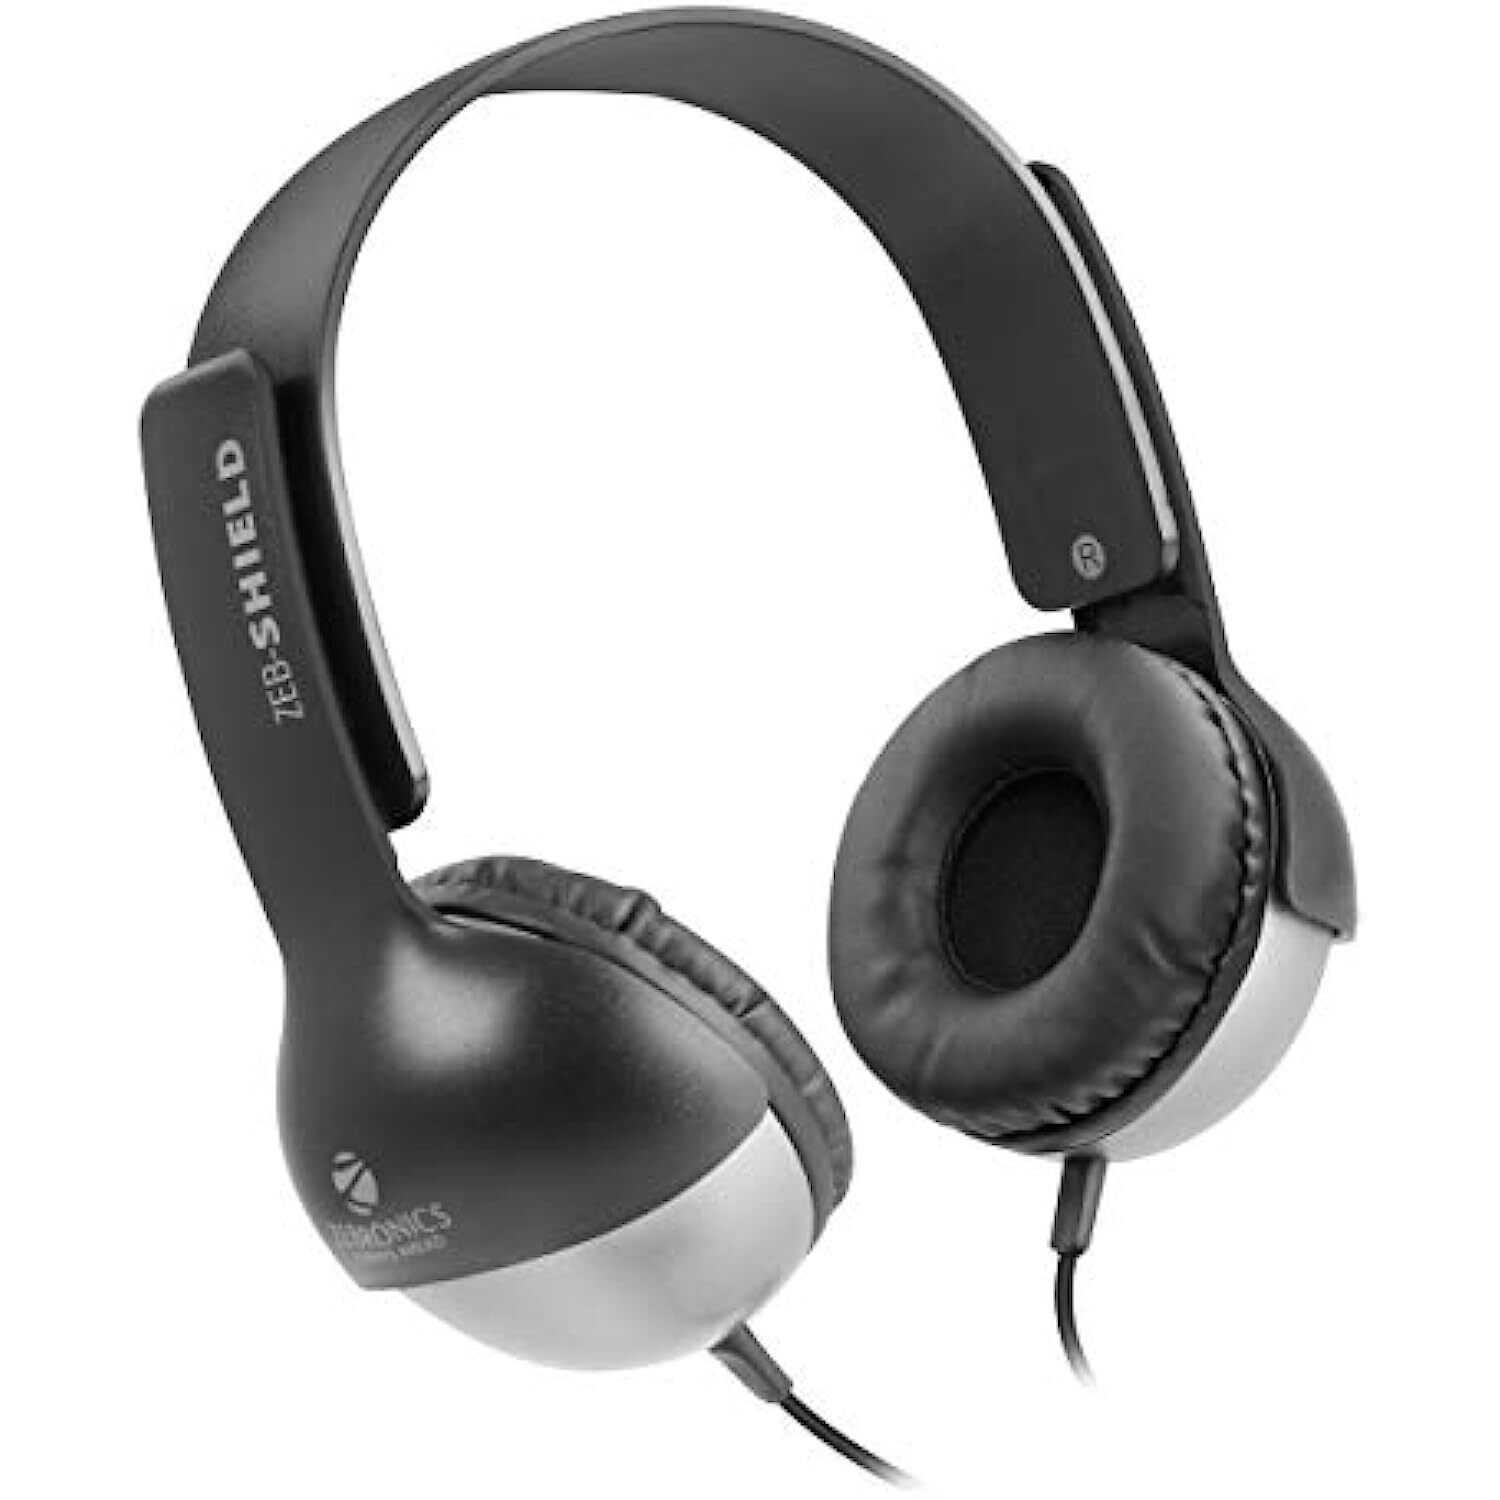 Zebronics Zeb-Shield Wired Headset with Mic (Black, Over The Ear)